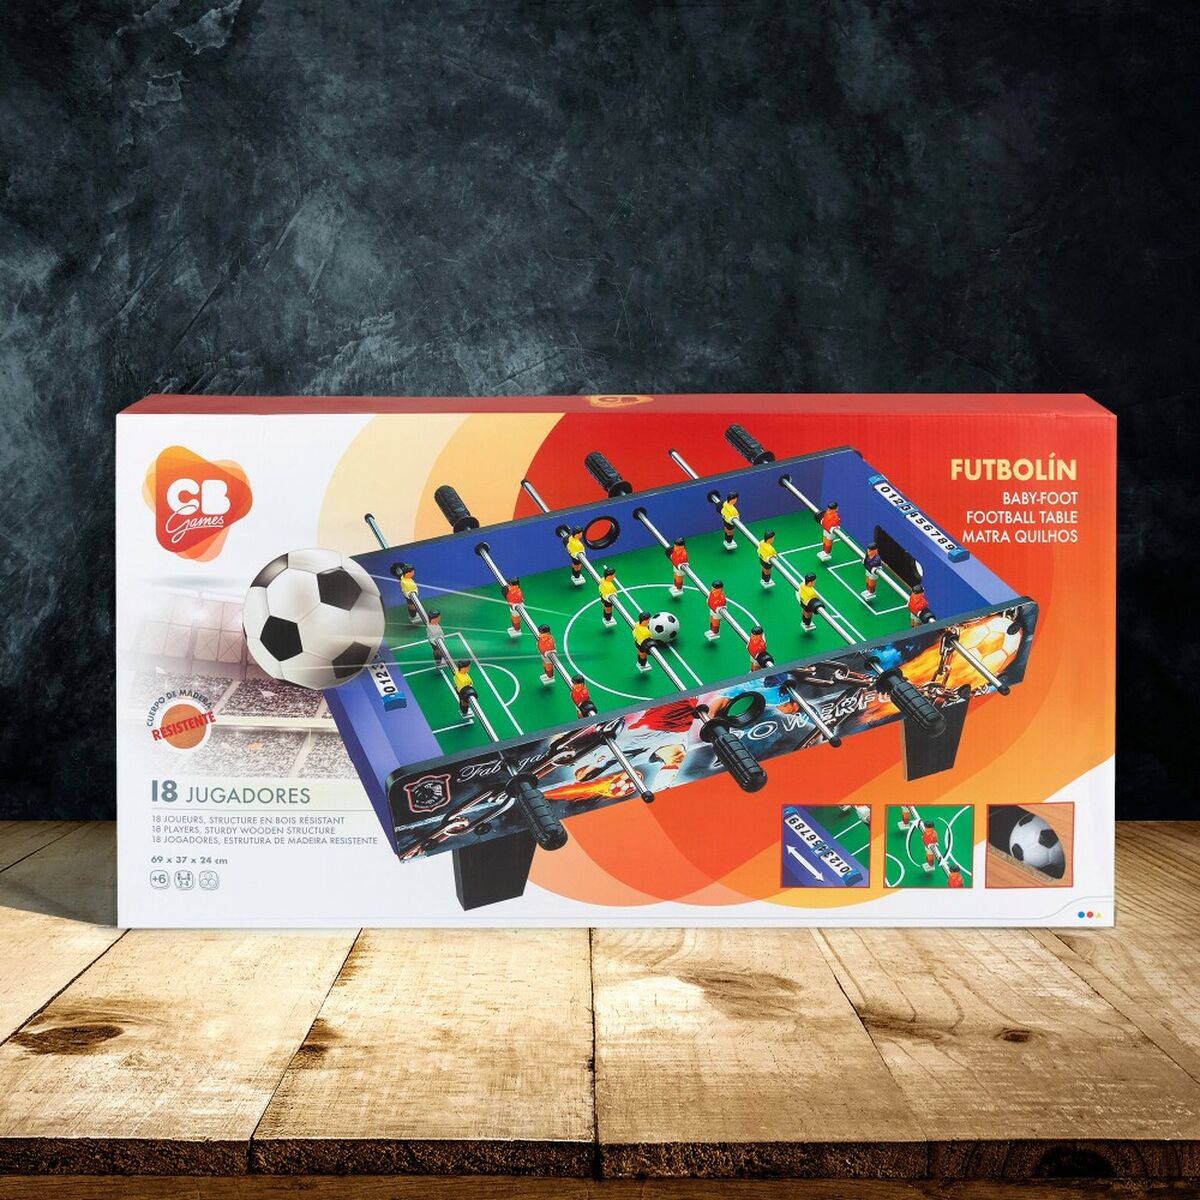 Table-top football Colorbaby 69 x 24 x 37 cm (2 Units) - Little Baby Shop